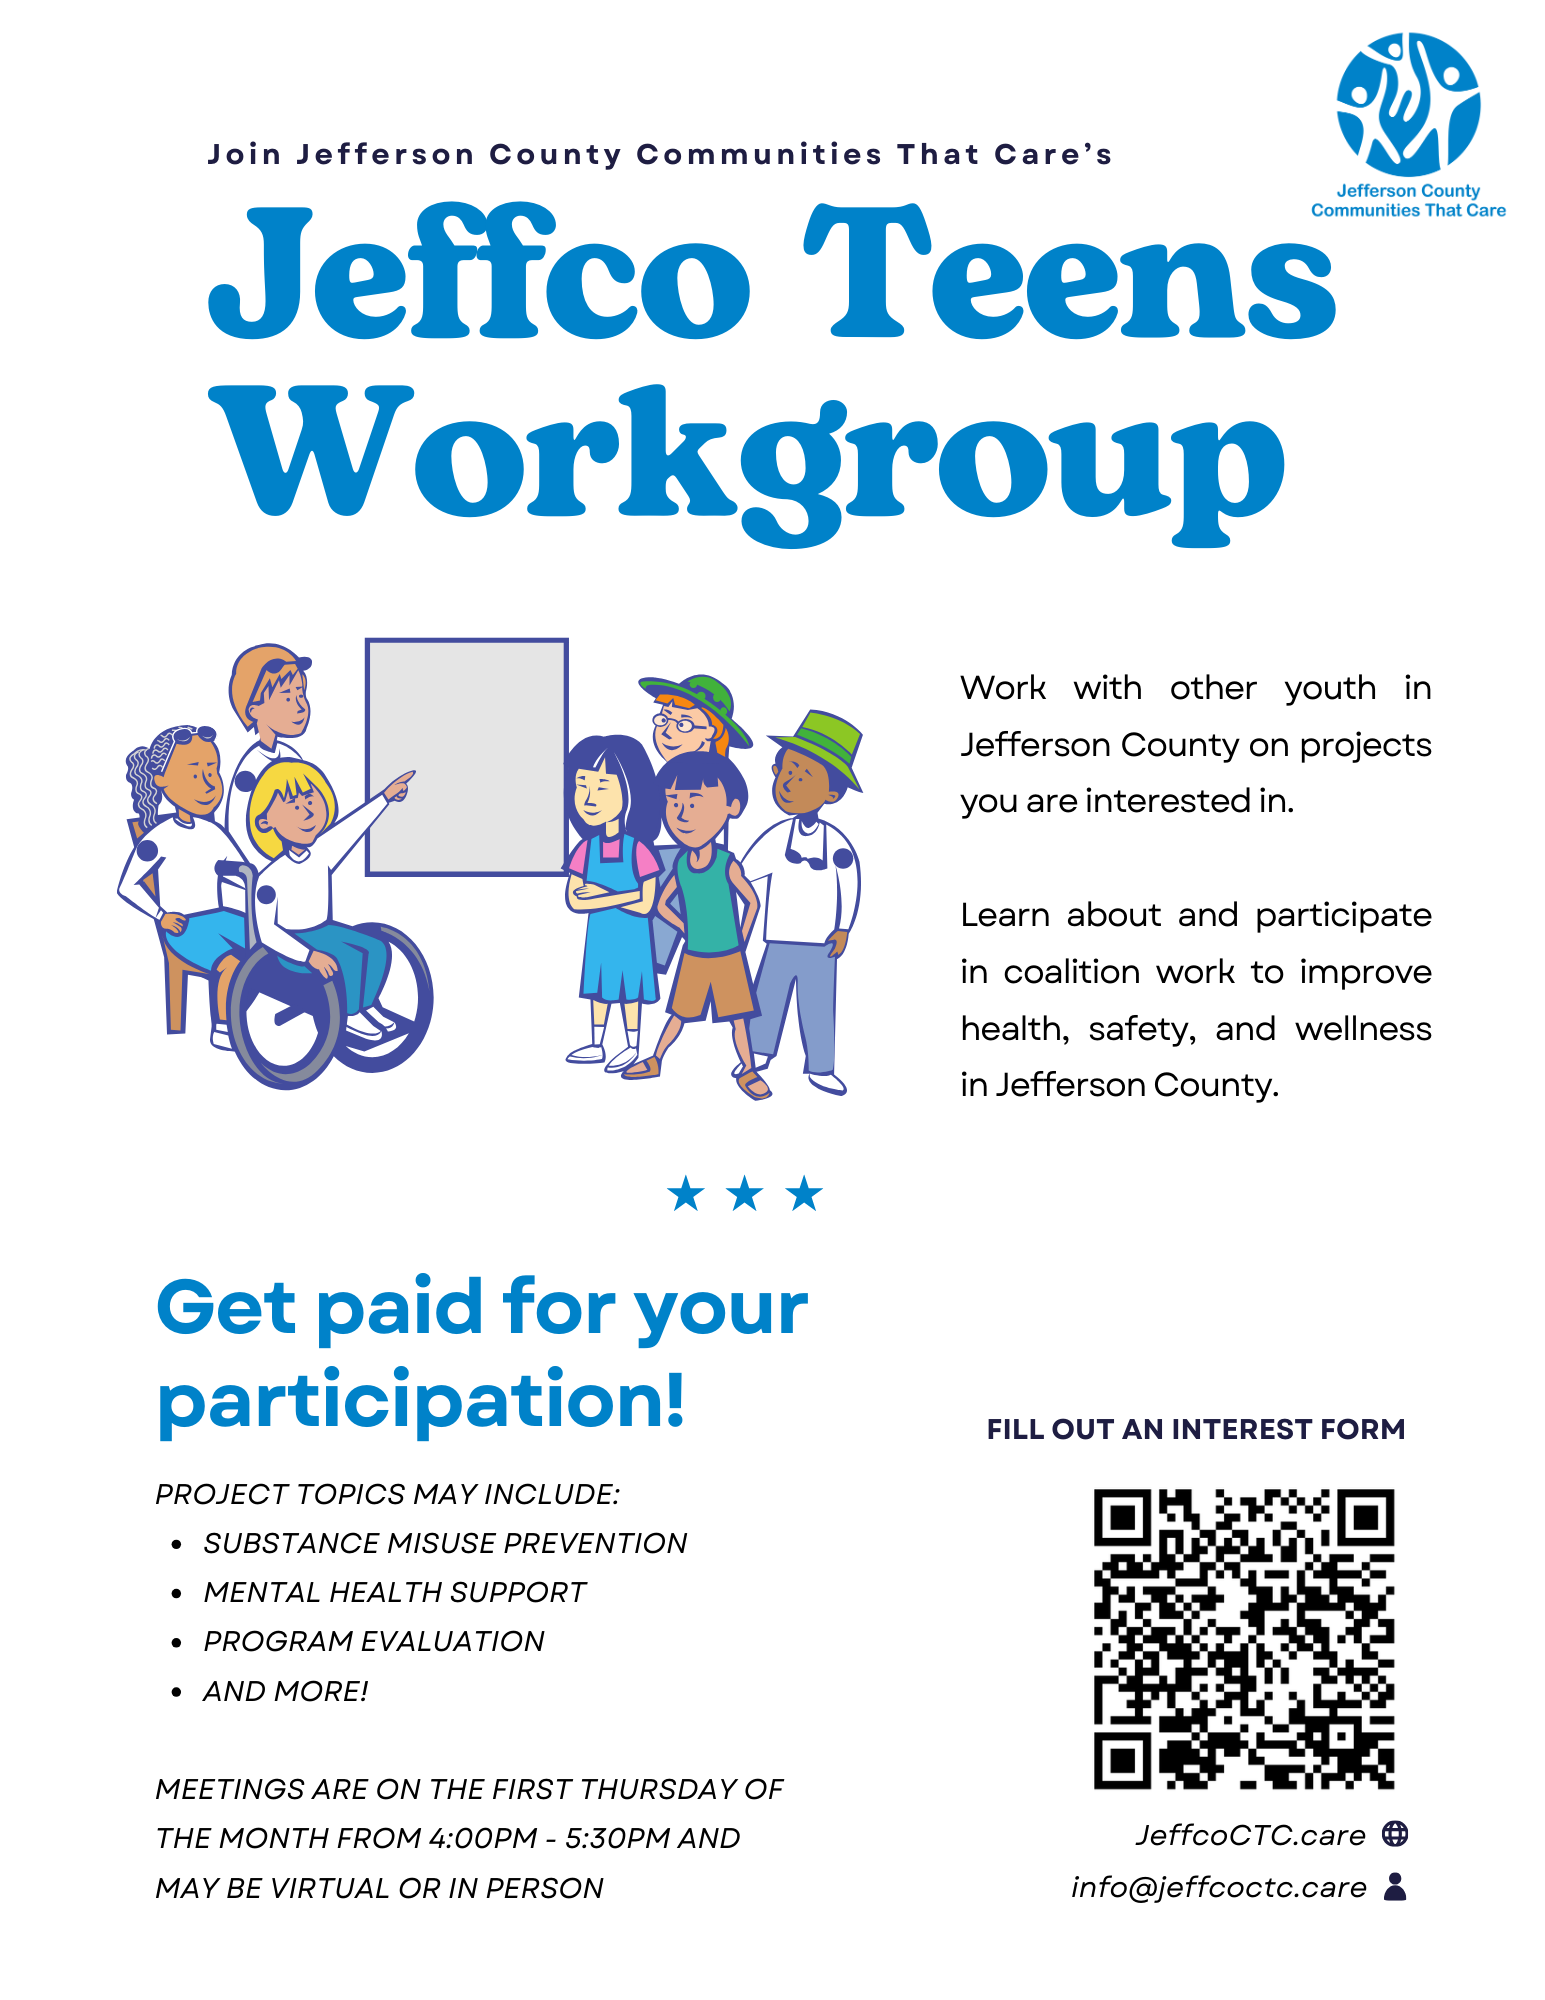 The new Jeffco Teens Workgroup is getting ready to start in May! This all-youth workgroup is a chance for youth in Jefferson County to work with other youth on projects they are interested in. This includes learning about and participating in coalition work to improve health, safety, and wellness in Jefferson County. Plus, youth who participate get paid!